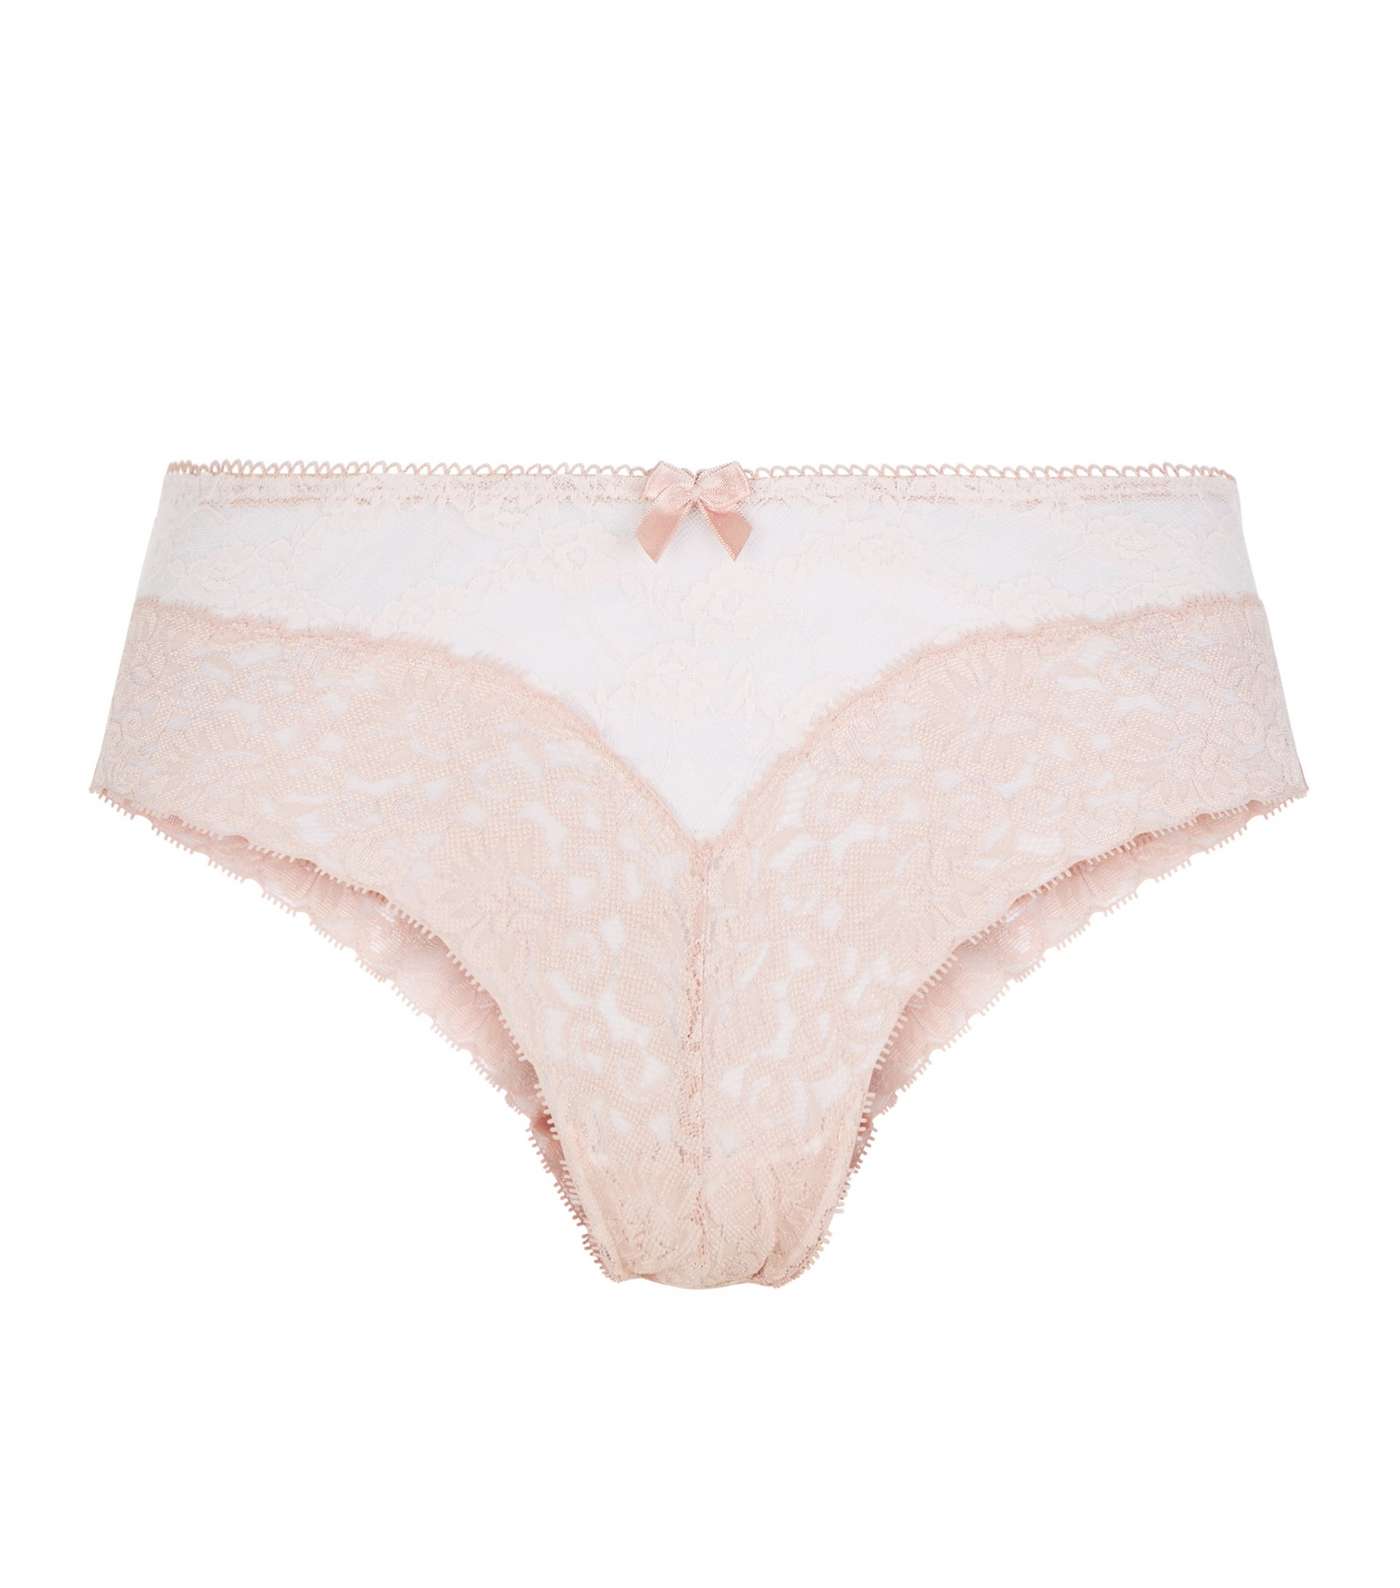 Pink Two Tone Lace Brazilian Briefs Image 3